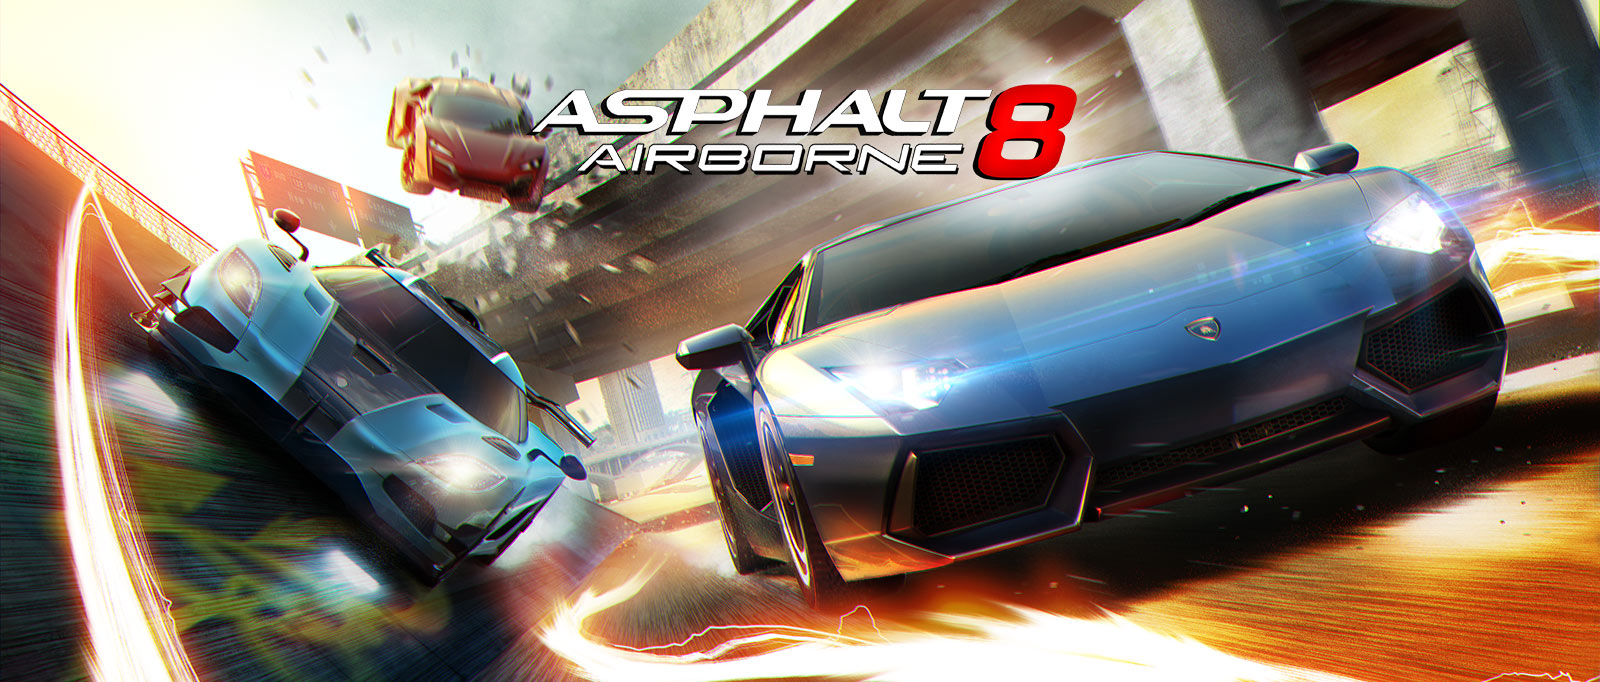 asphalt 8 pc local wifi multiplayer not working